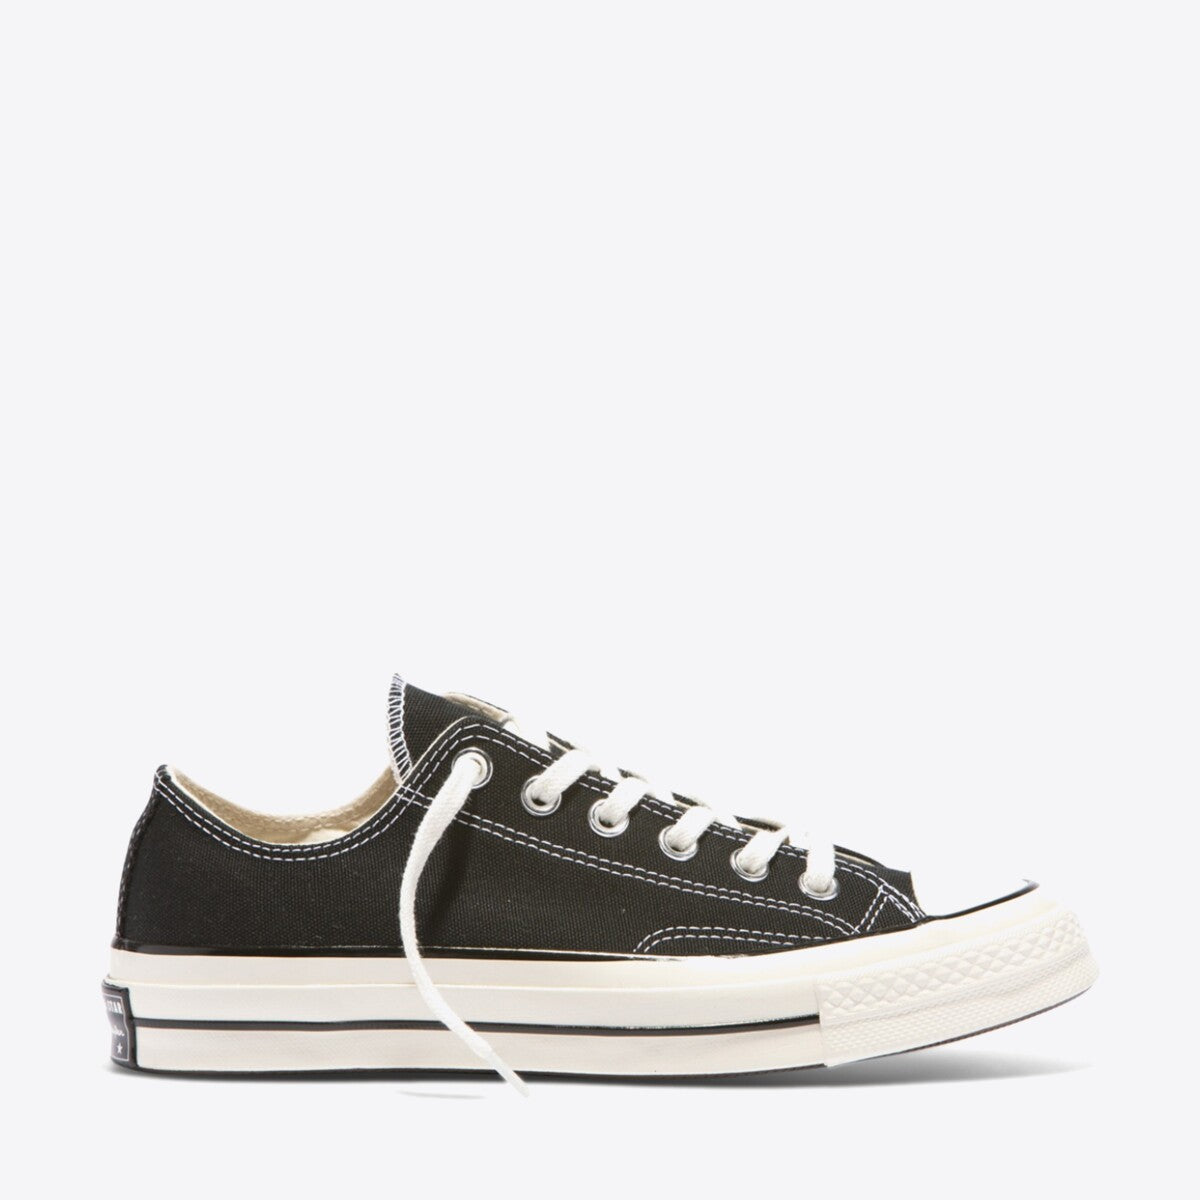  Chuck Taylor All Star 70 Canvas Low Top Black